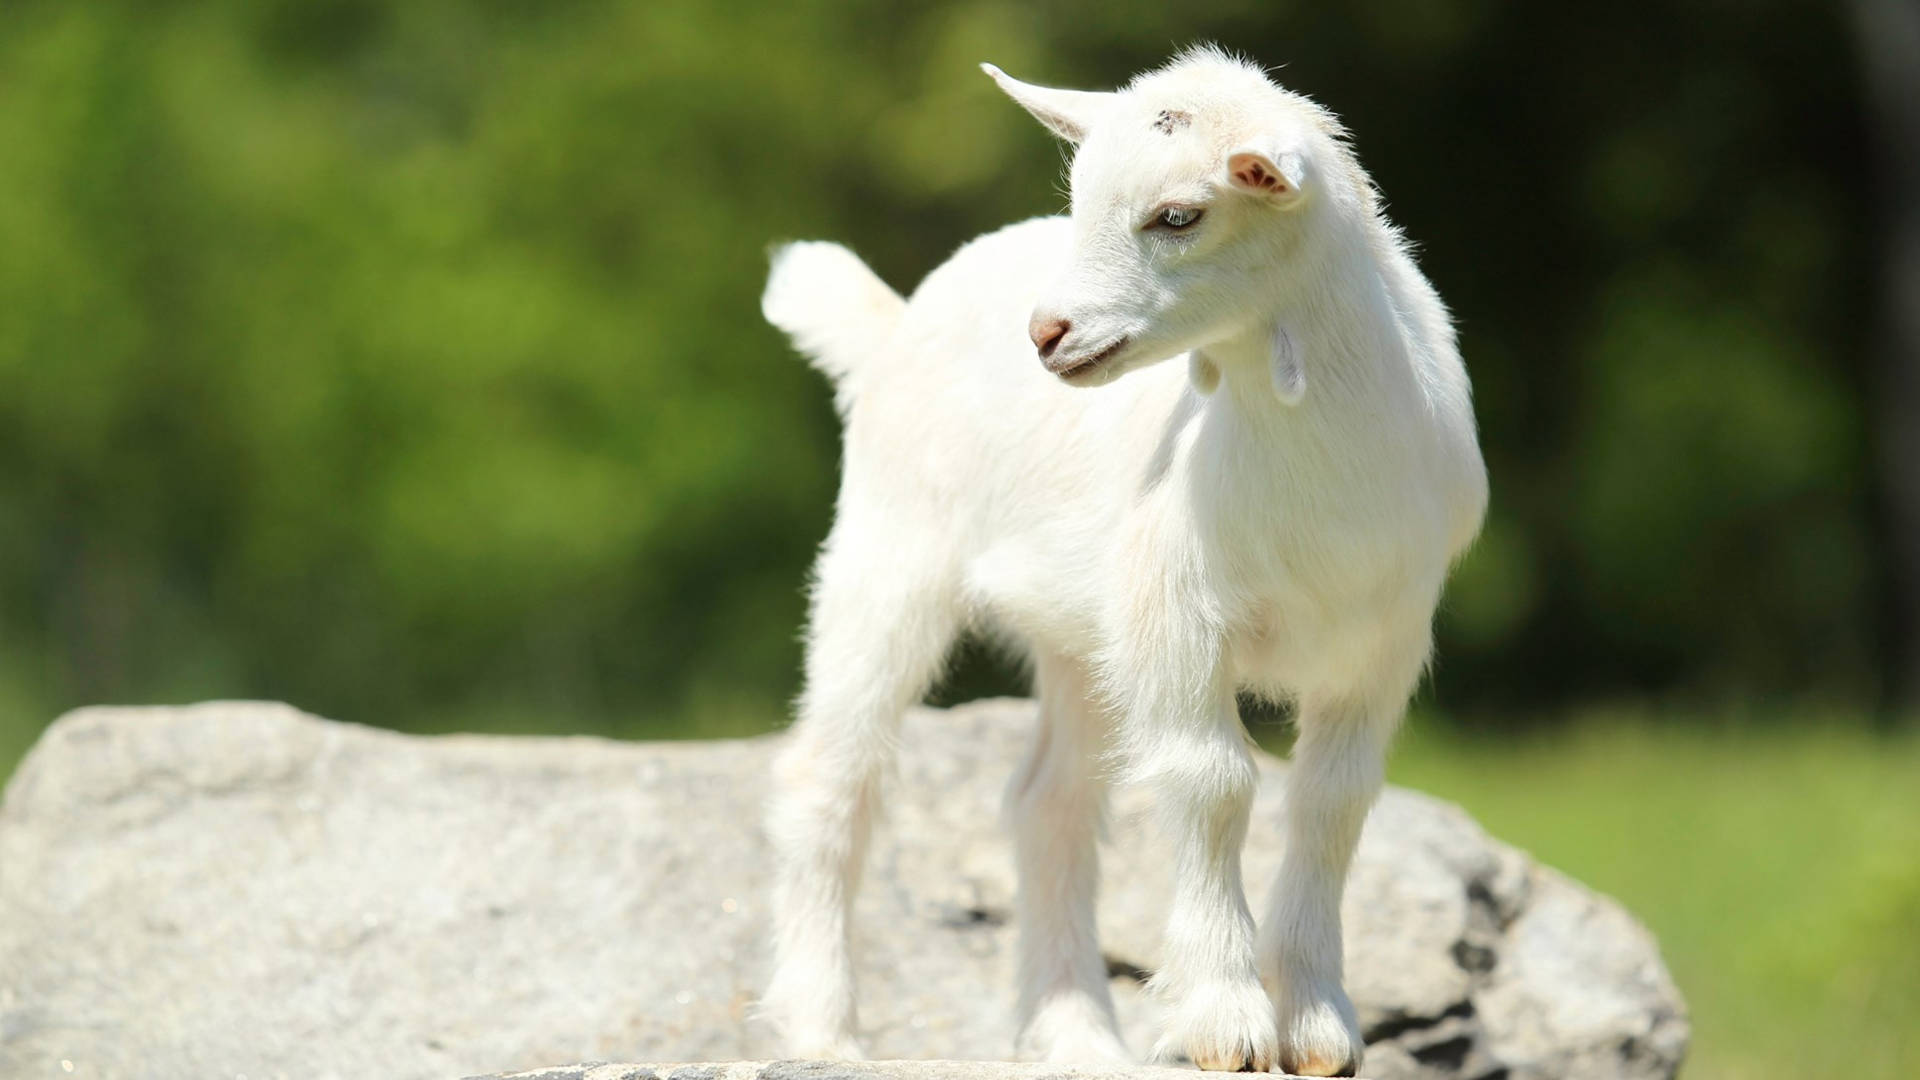 Caption: Adorable White Baby Goat Resting on a Large Grey Rock Wallpaper